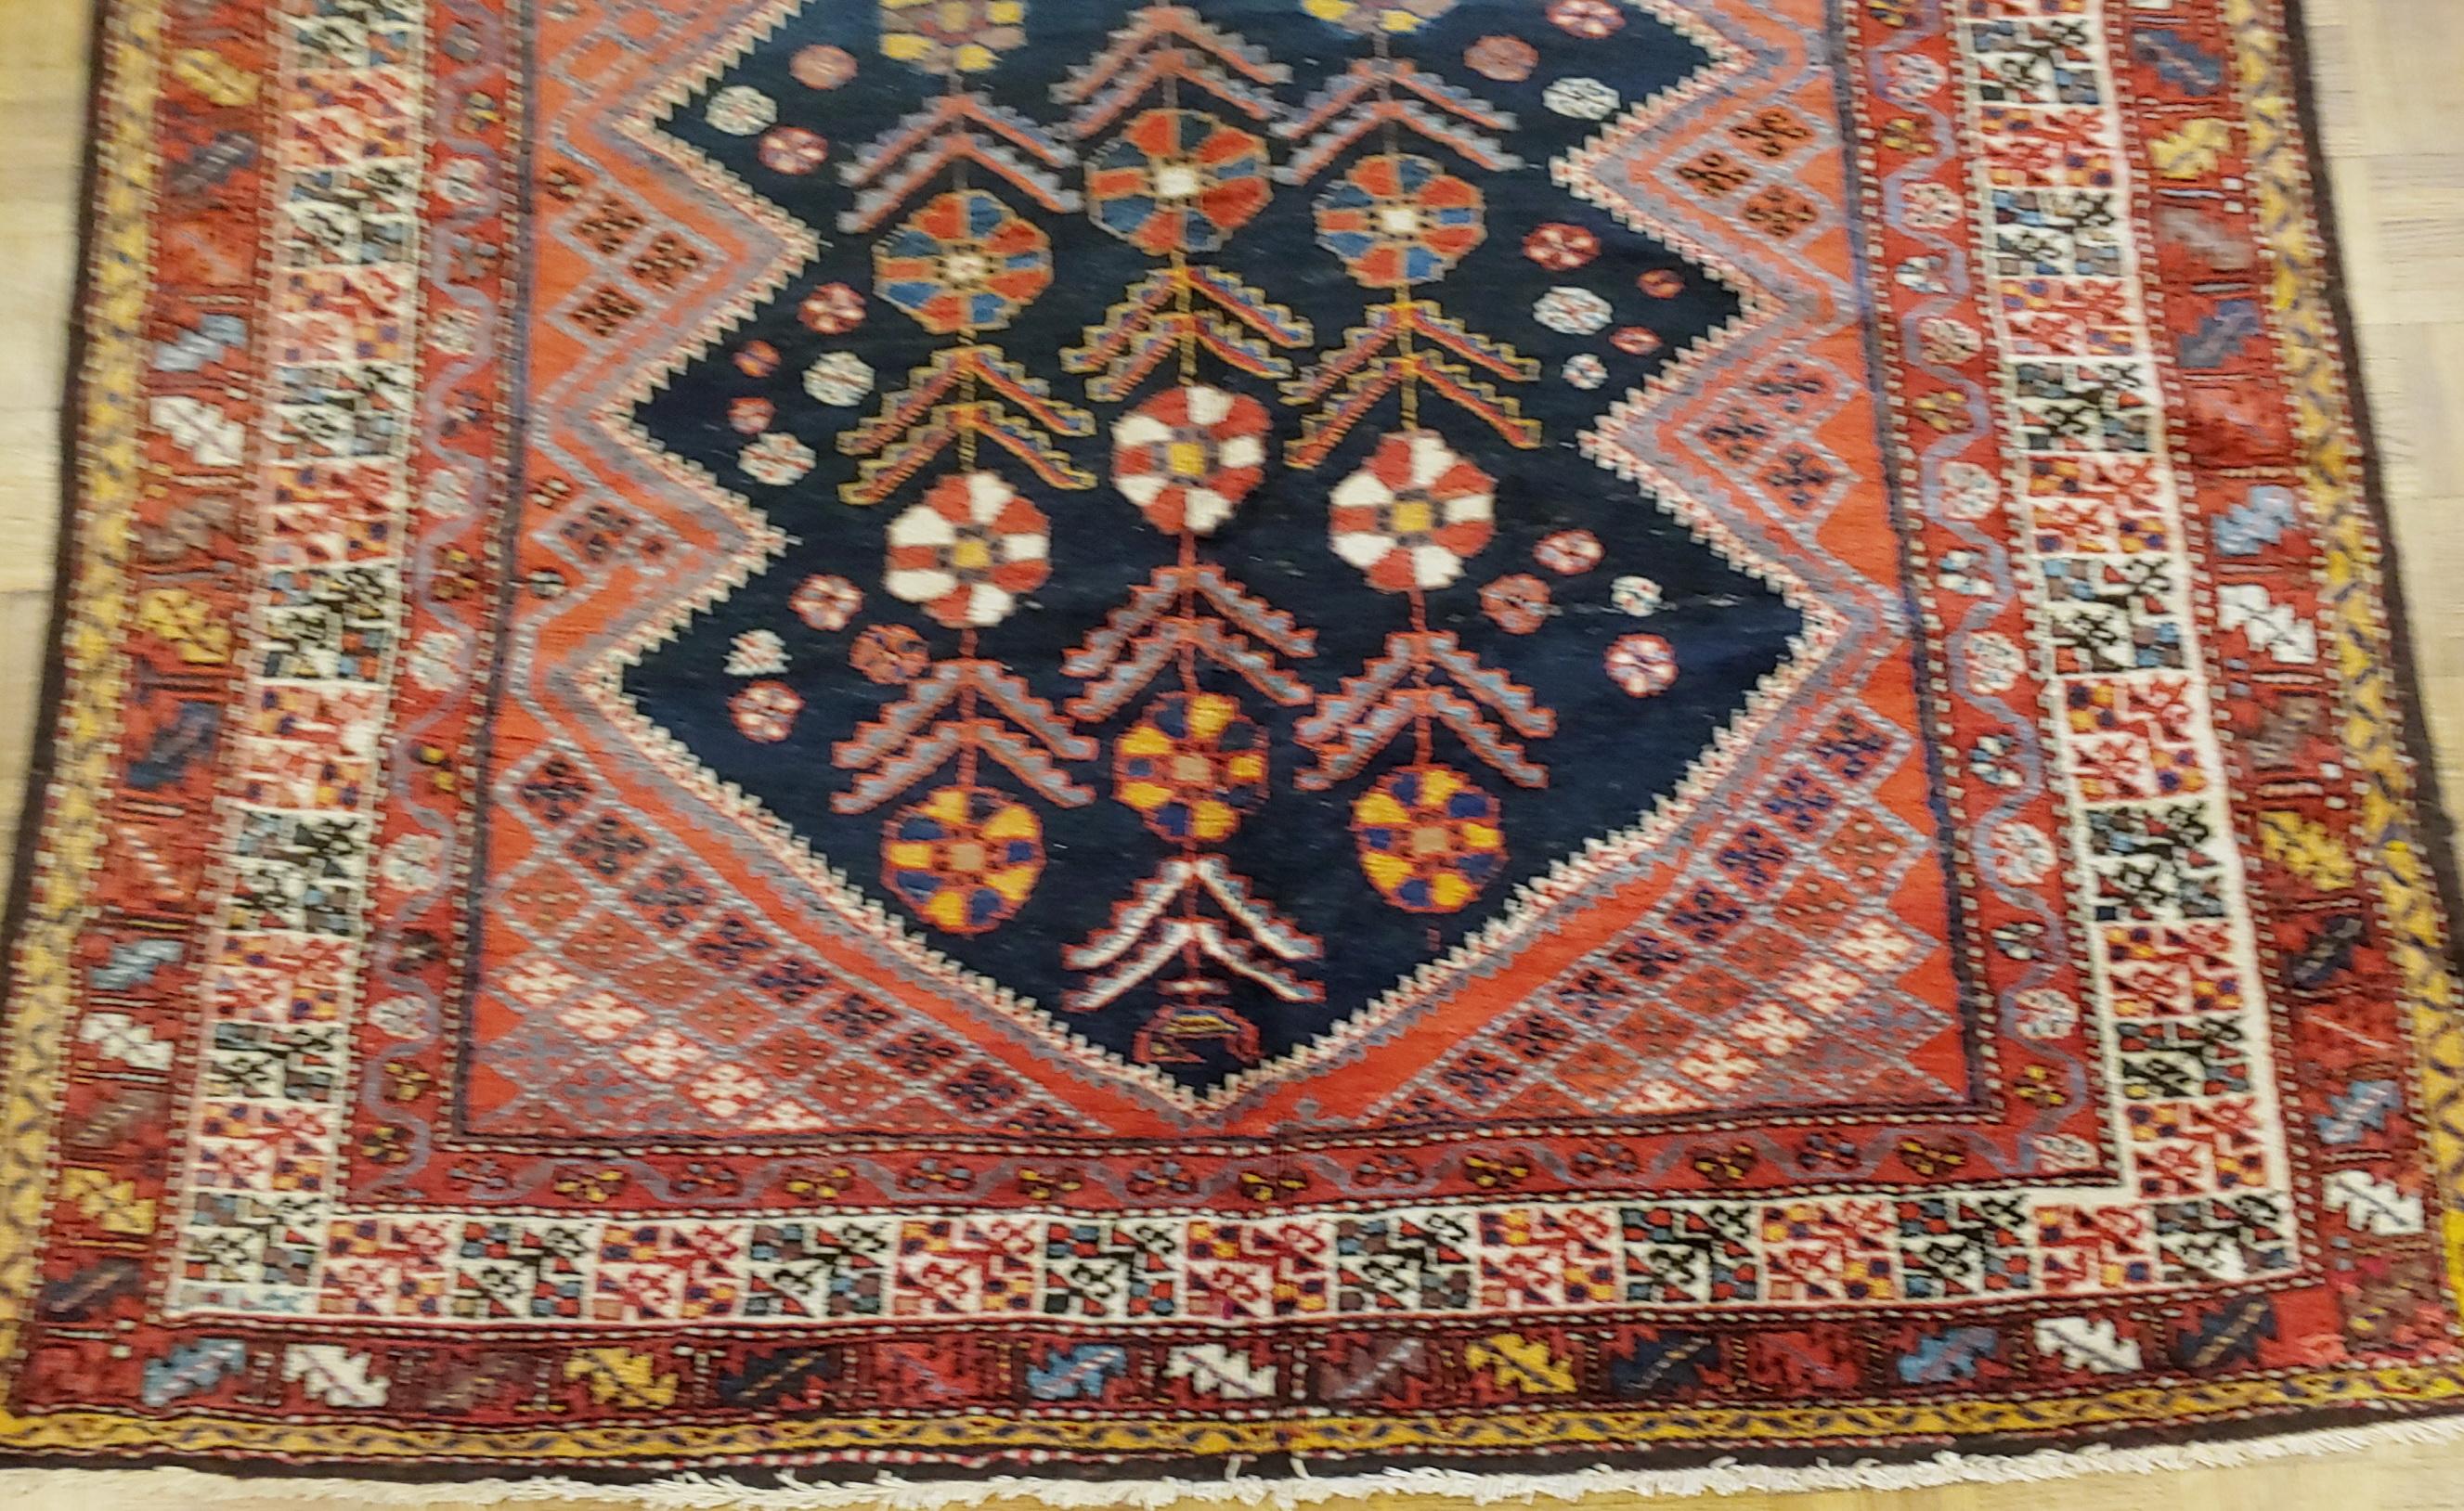 This antique Persian Malayer has a navy field with a floral design with a secondary outer field covered with small geometric diamond design. The border is a series of narrow bands. The colors are reds, navy, rust, and yellow. These very fine Malayer